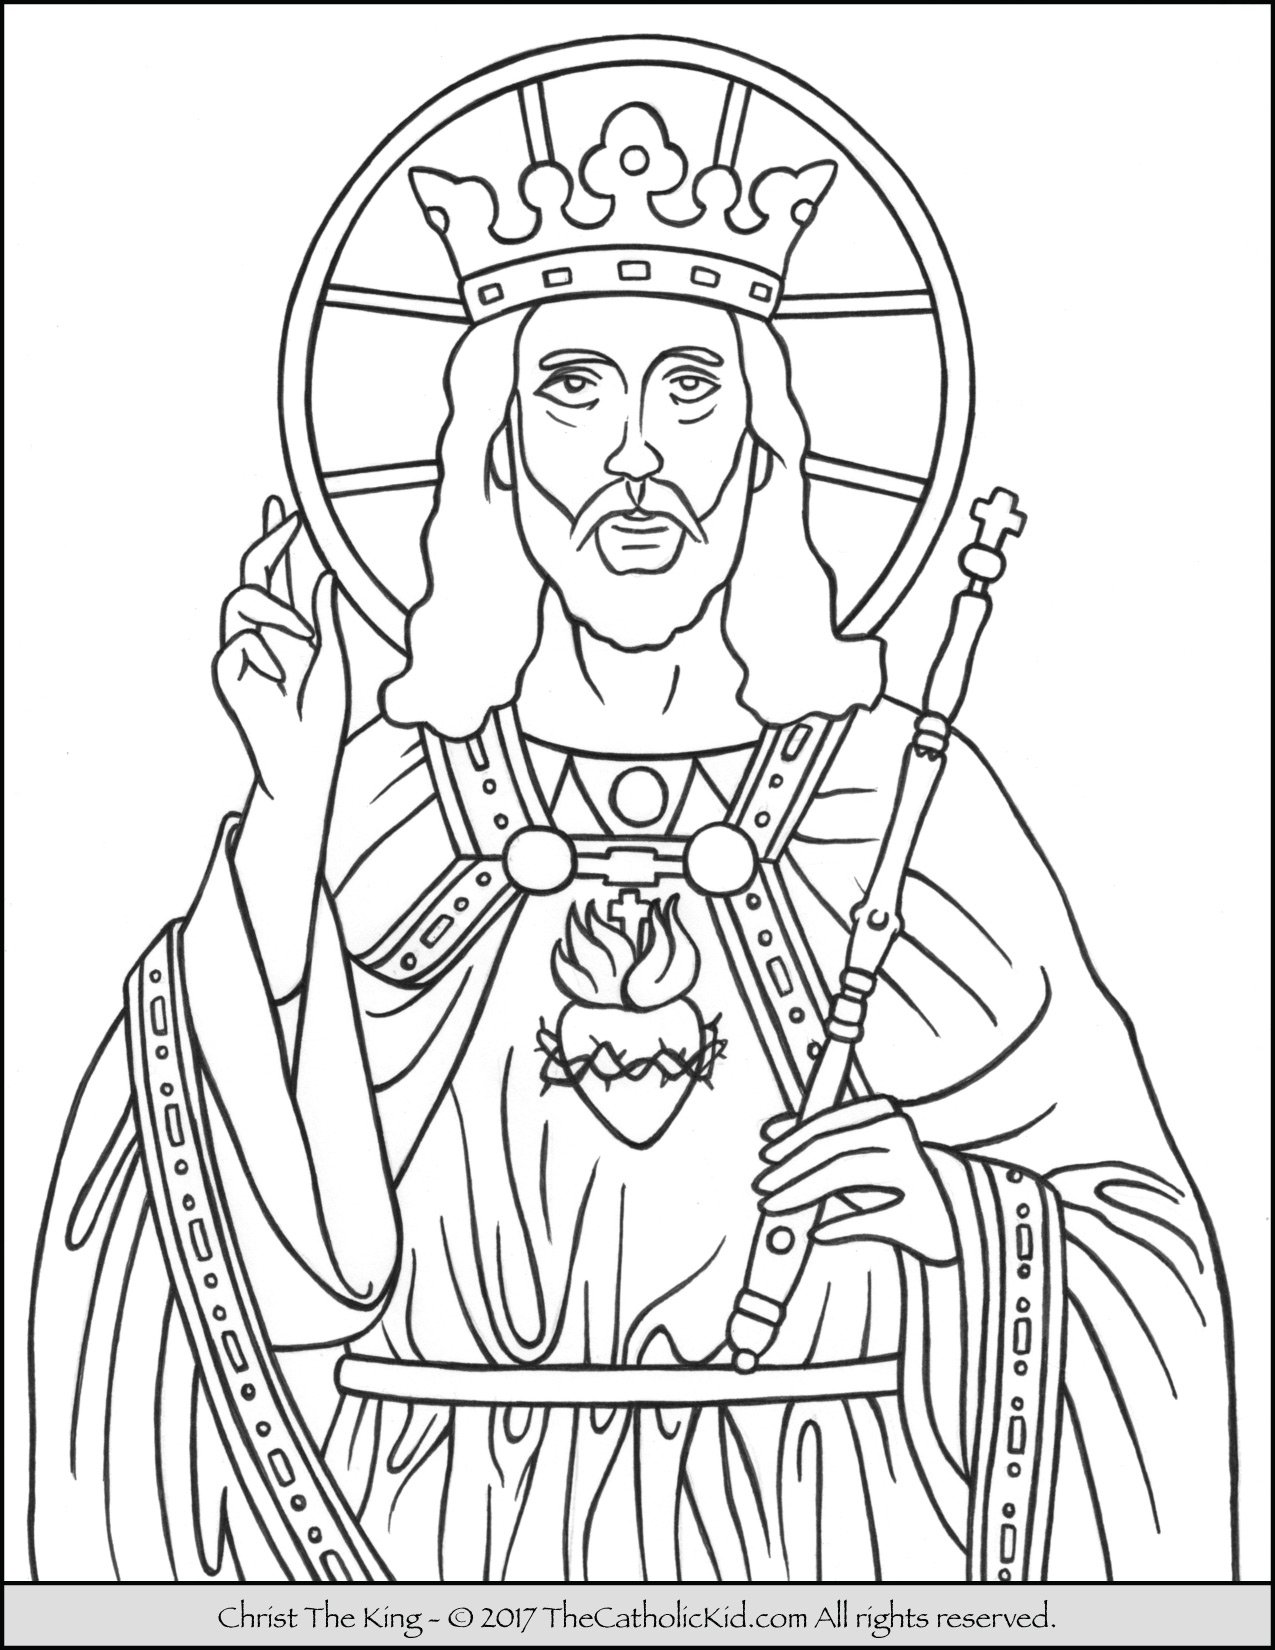 Christ the king coloring page